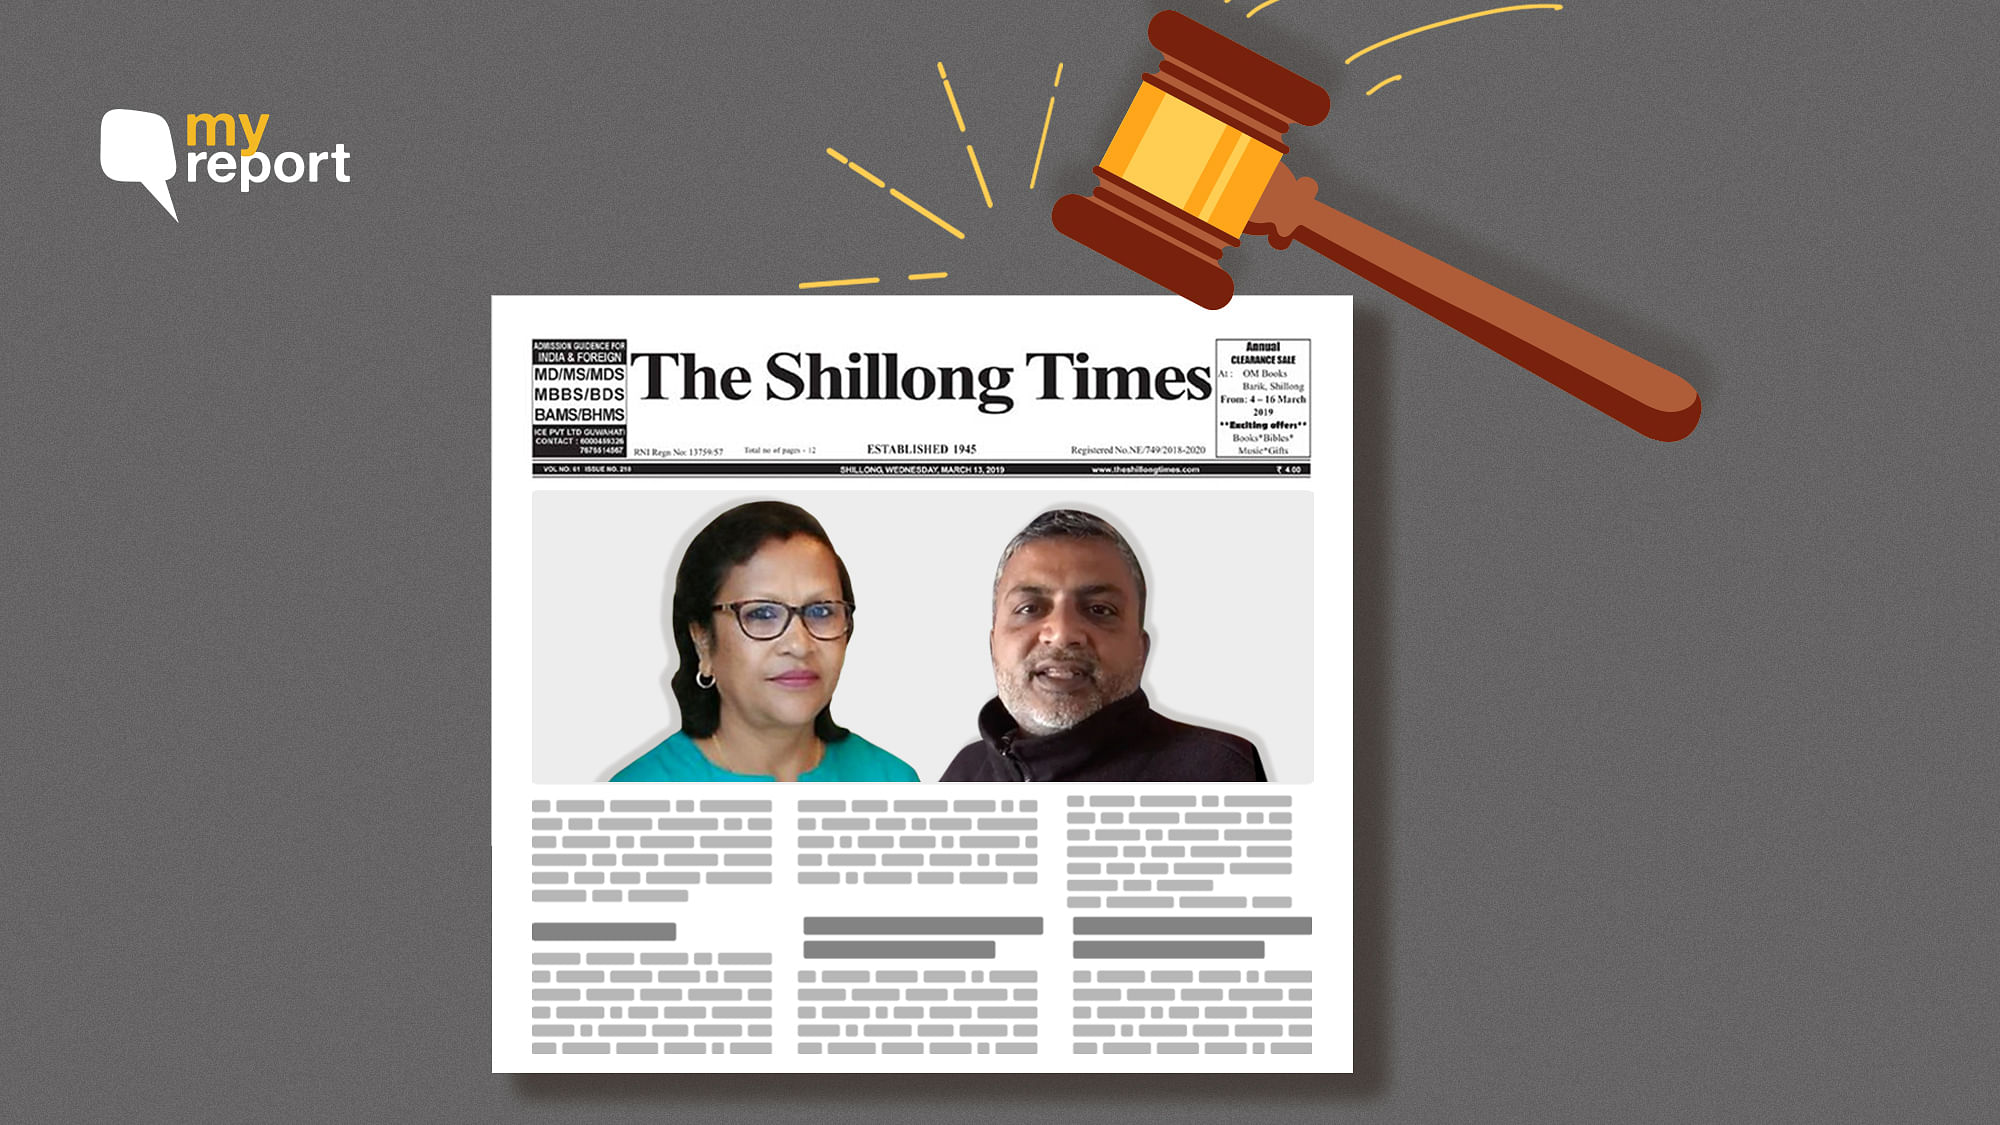 Citizens in Shillong are helping crowdfund the legal defence of ‘The Shillong Times’ journalists.&nbsp;